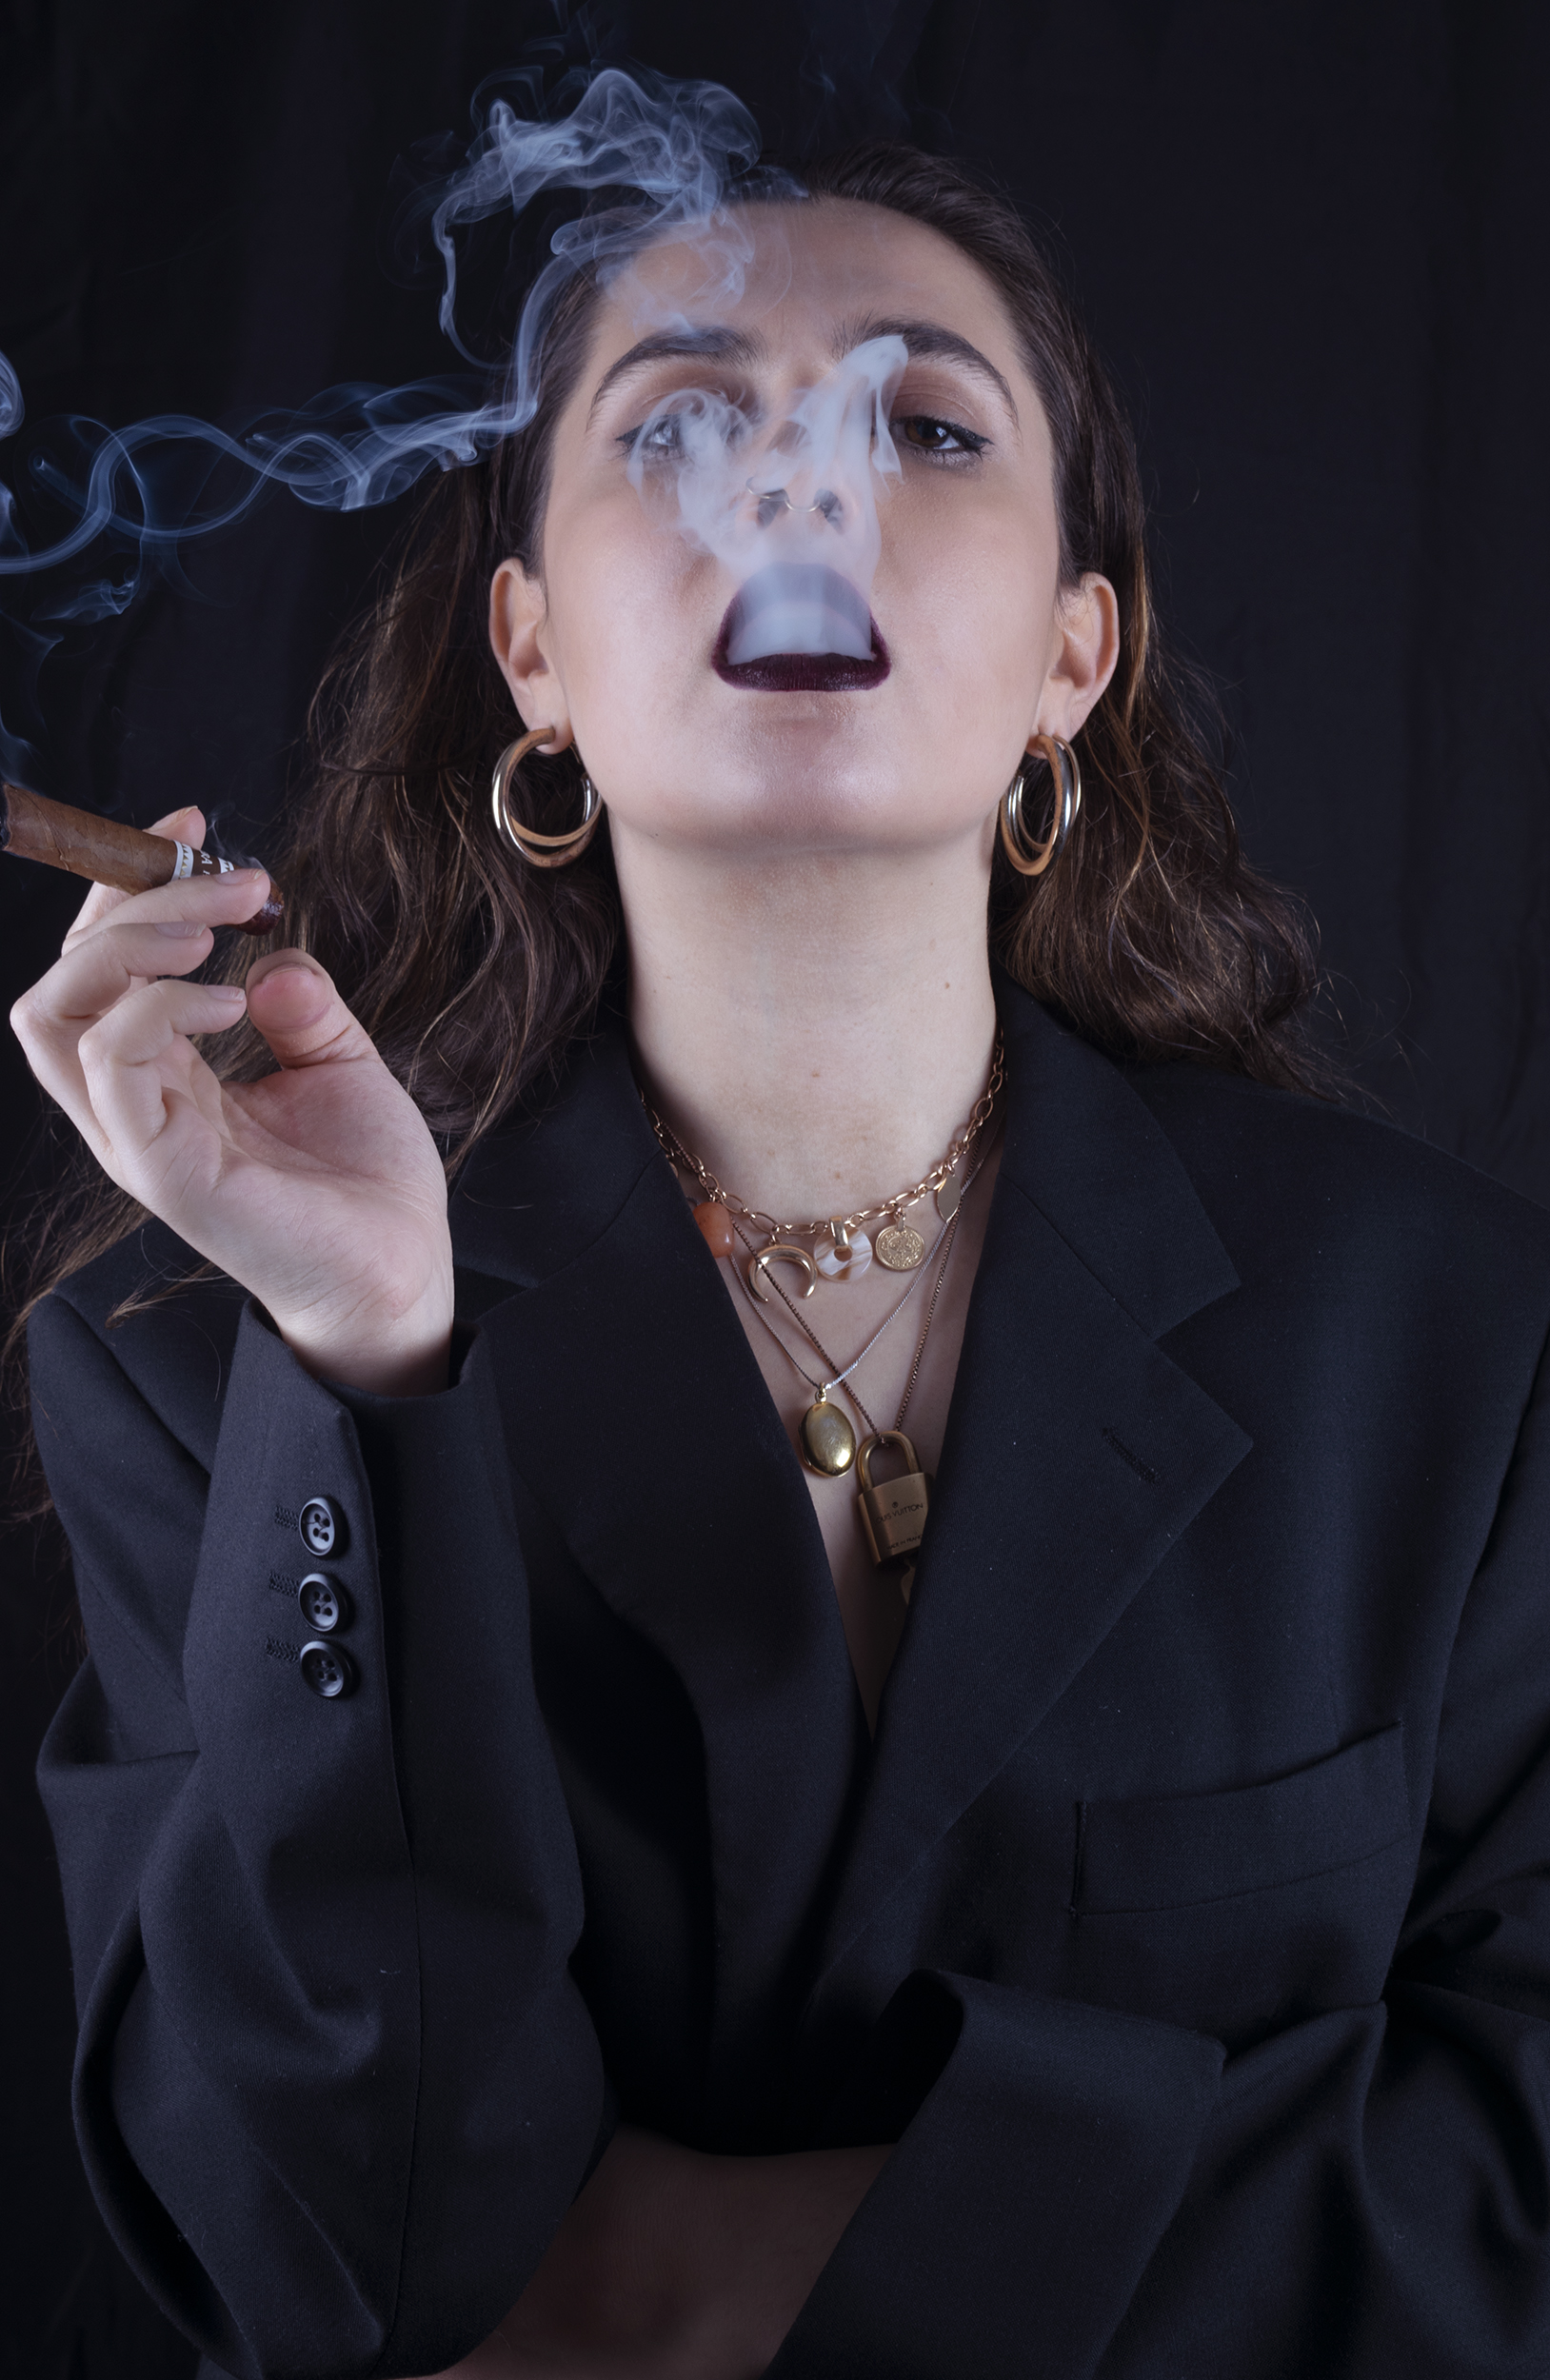 Black background, woman smoking in a suit, smoke surrounds her.